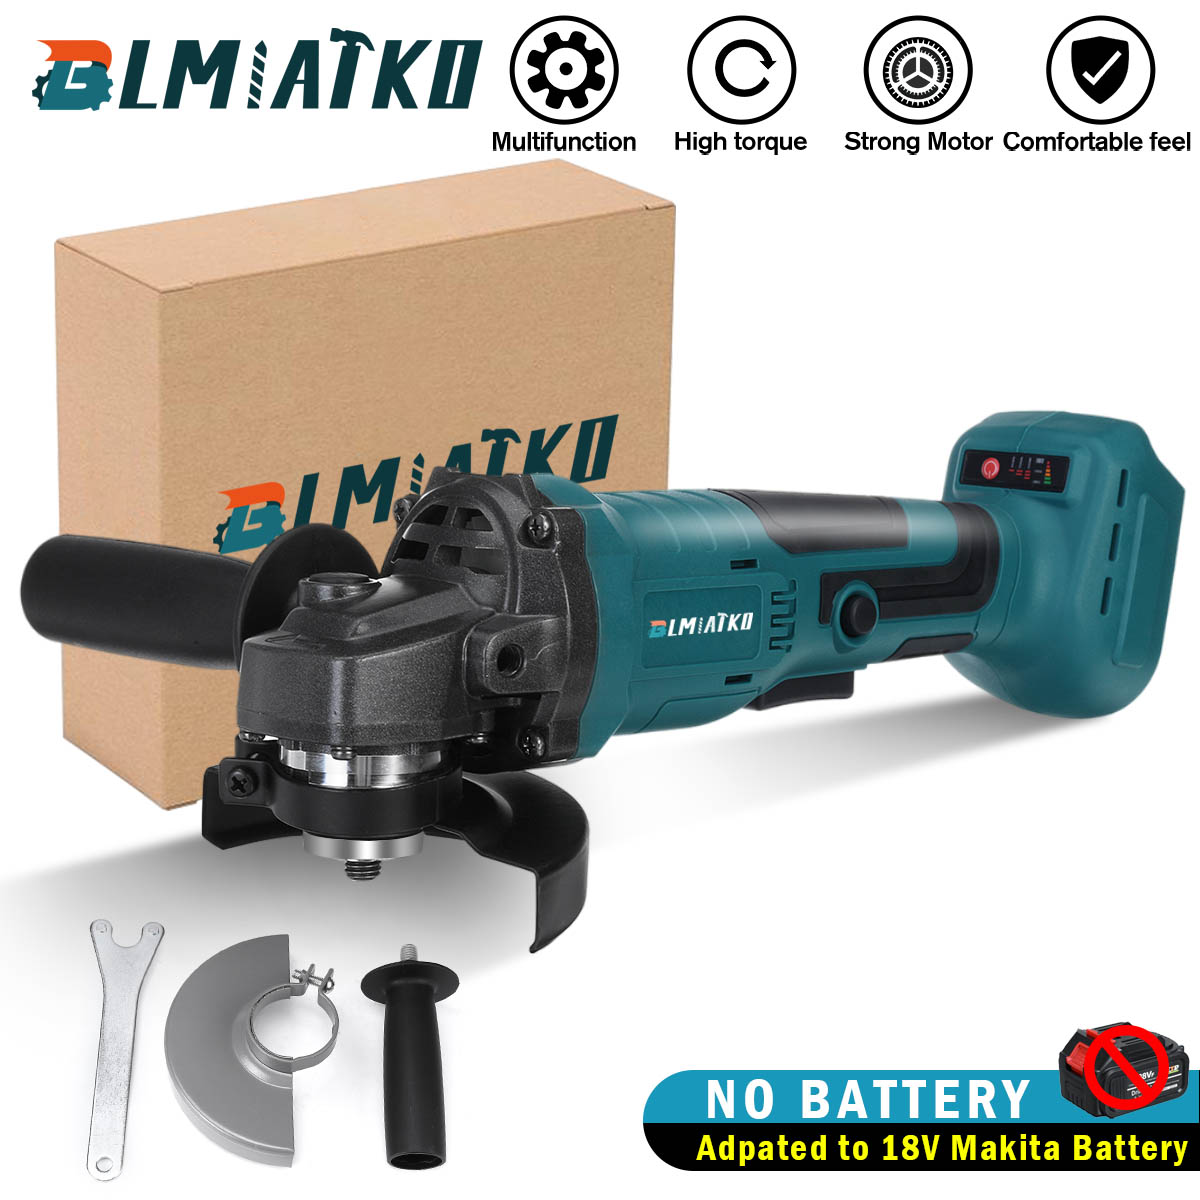 BLMIATKO-18V-800W-Lithium-Battery-Brushless-Angle-Grinder-100MM-11000RPM-Rechargeable-Polishing-Sand-1638251-1